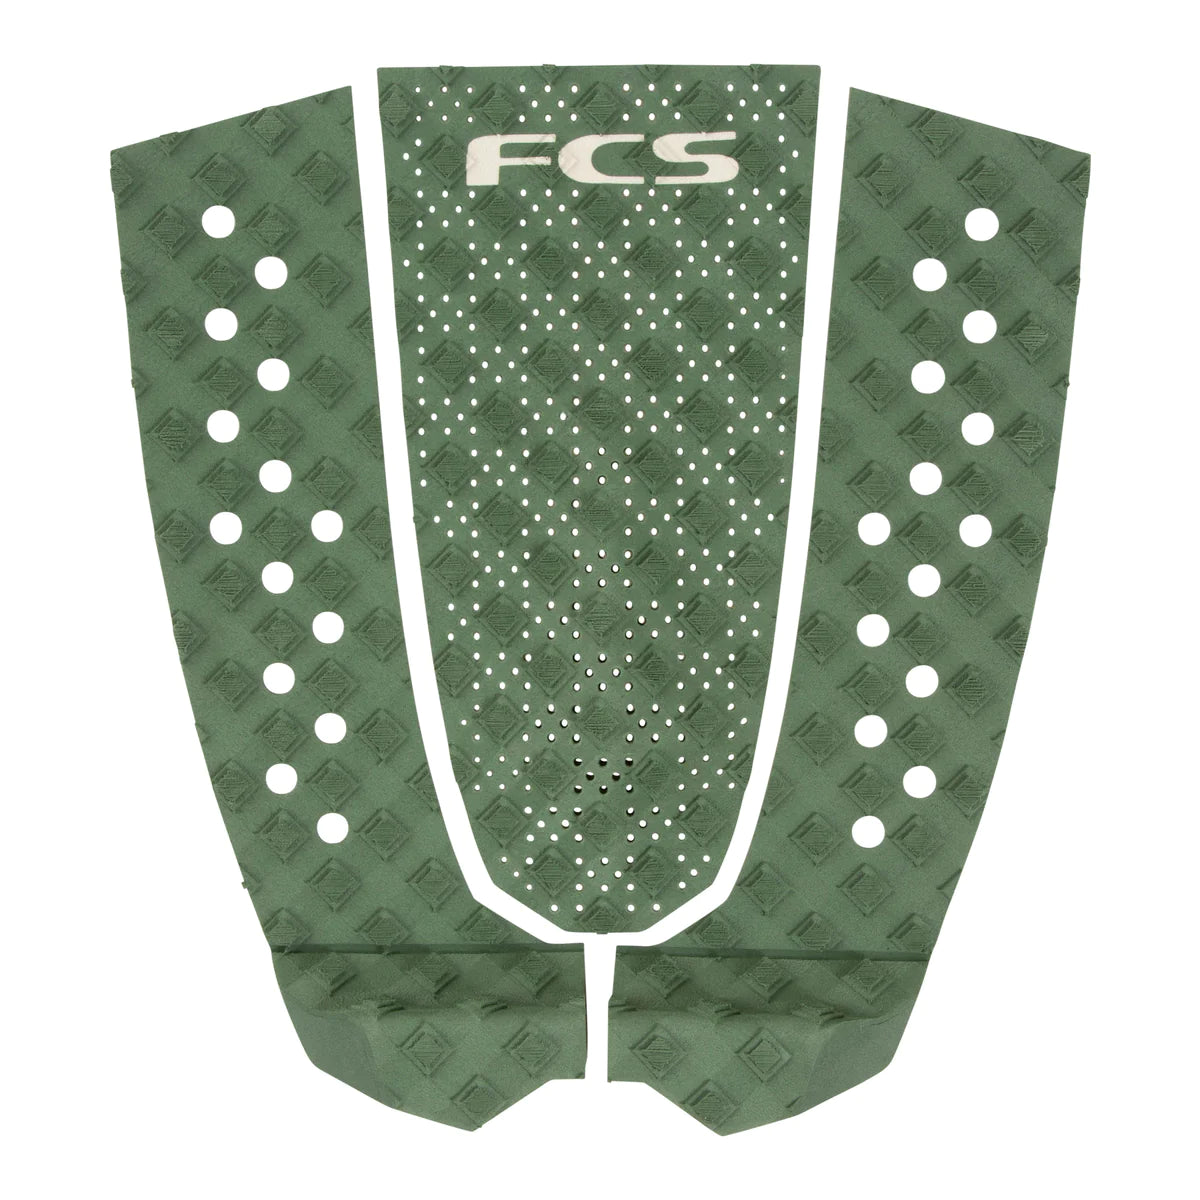 FCS T-3 Eco Traction Pad - Jade